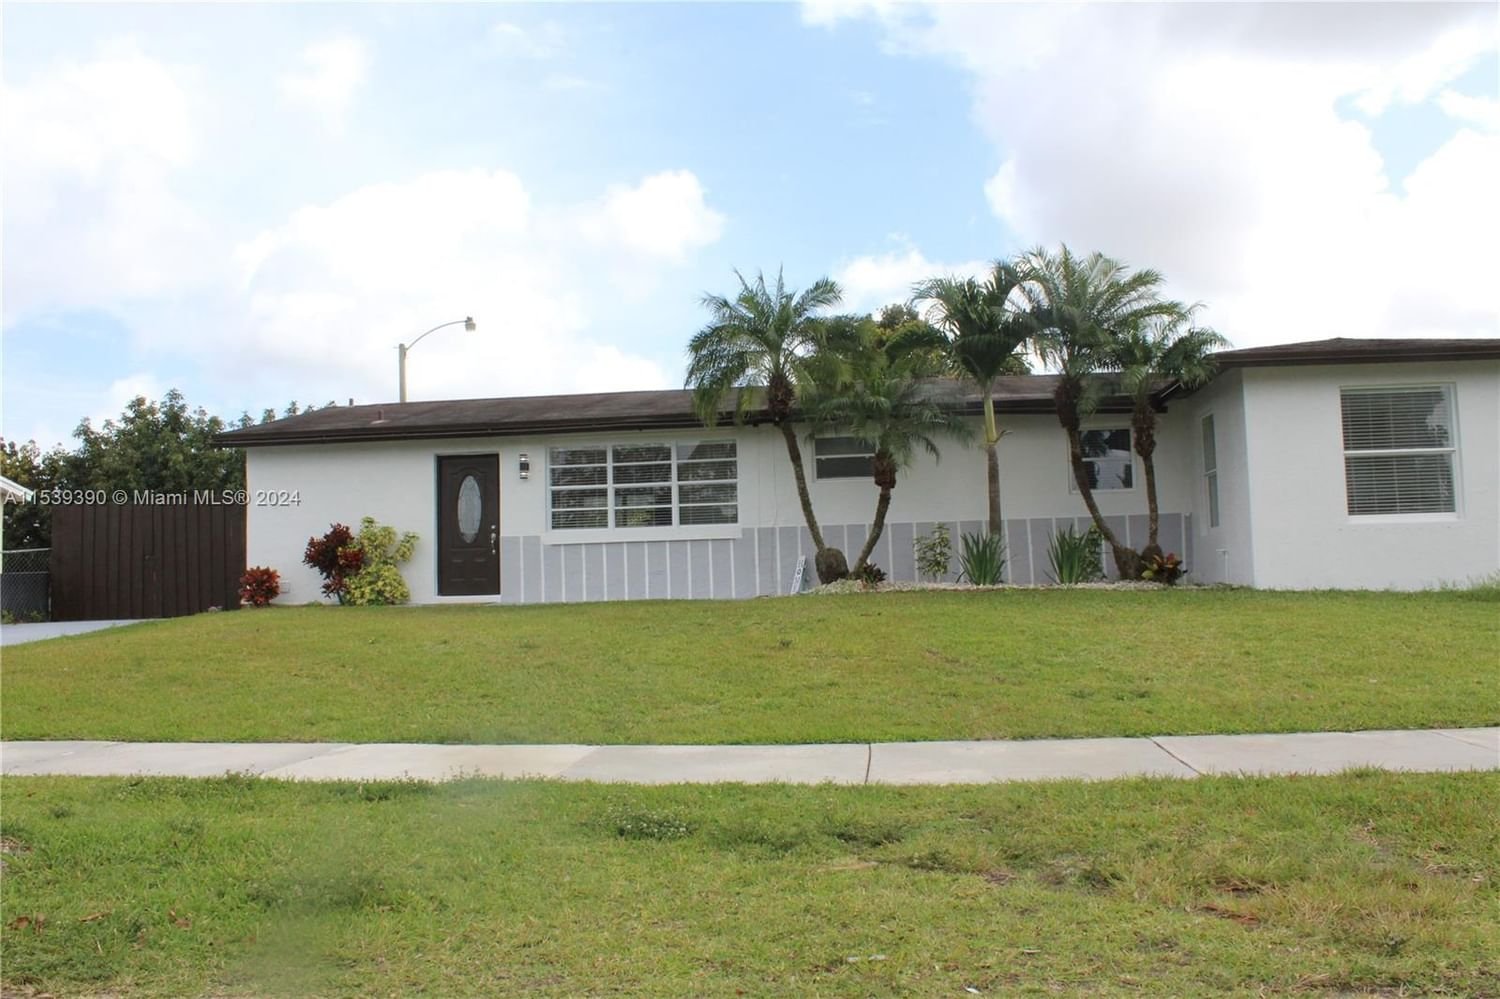 Real estate property located at 30055 143rd Ct, Miami-Dade County, GEM HOMES #3, Homestead, FL